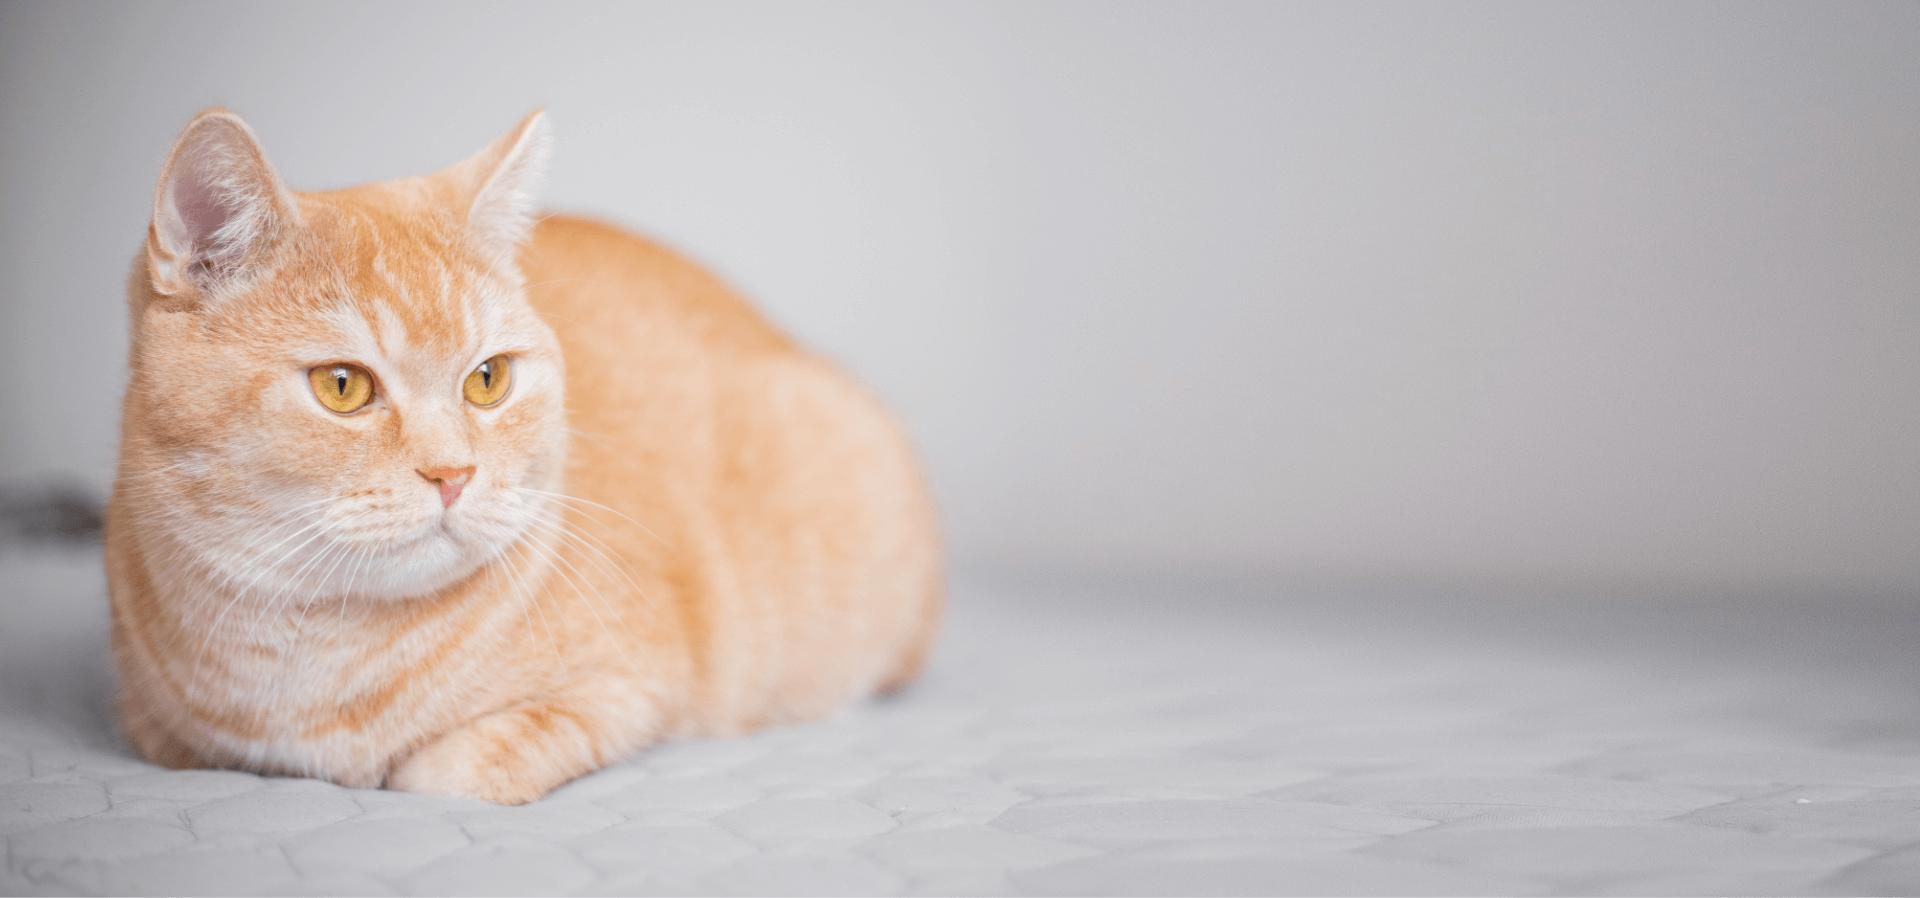 Supporting kidney health in cats